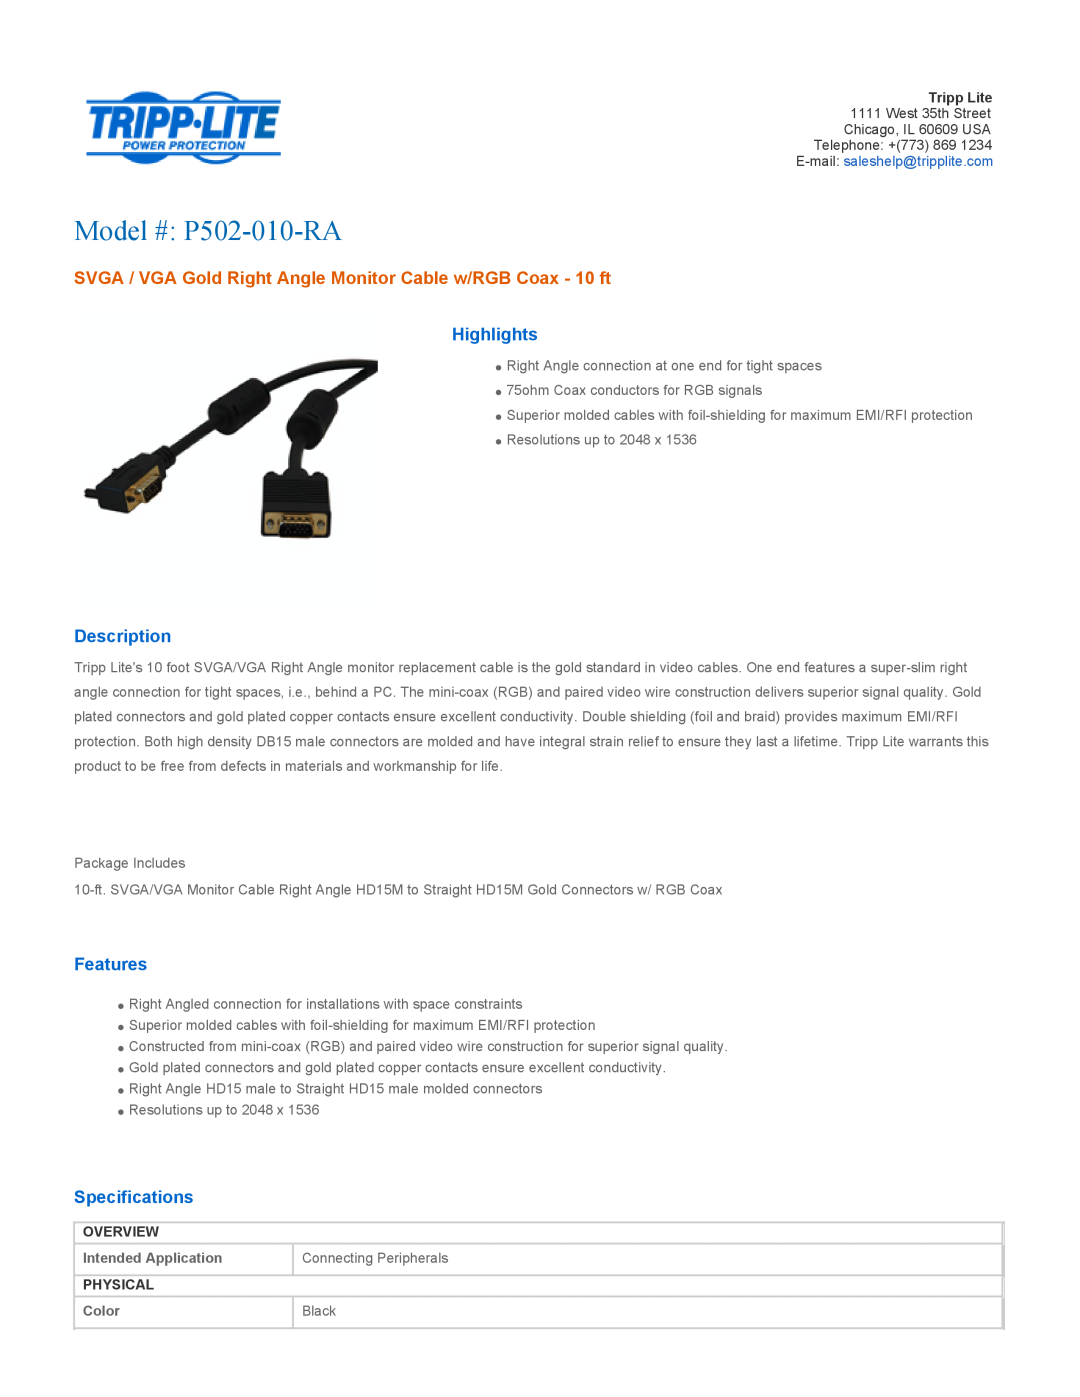 Tripp Lite P502-010-RA specifications Overview, Intended Application, Connecting Peripherals, Physical, Color, Black 